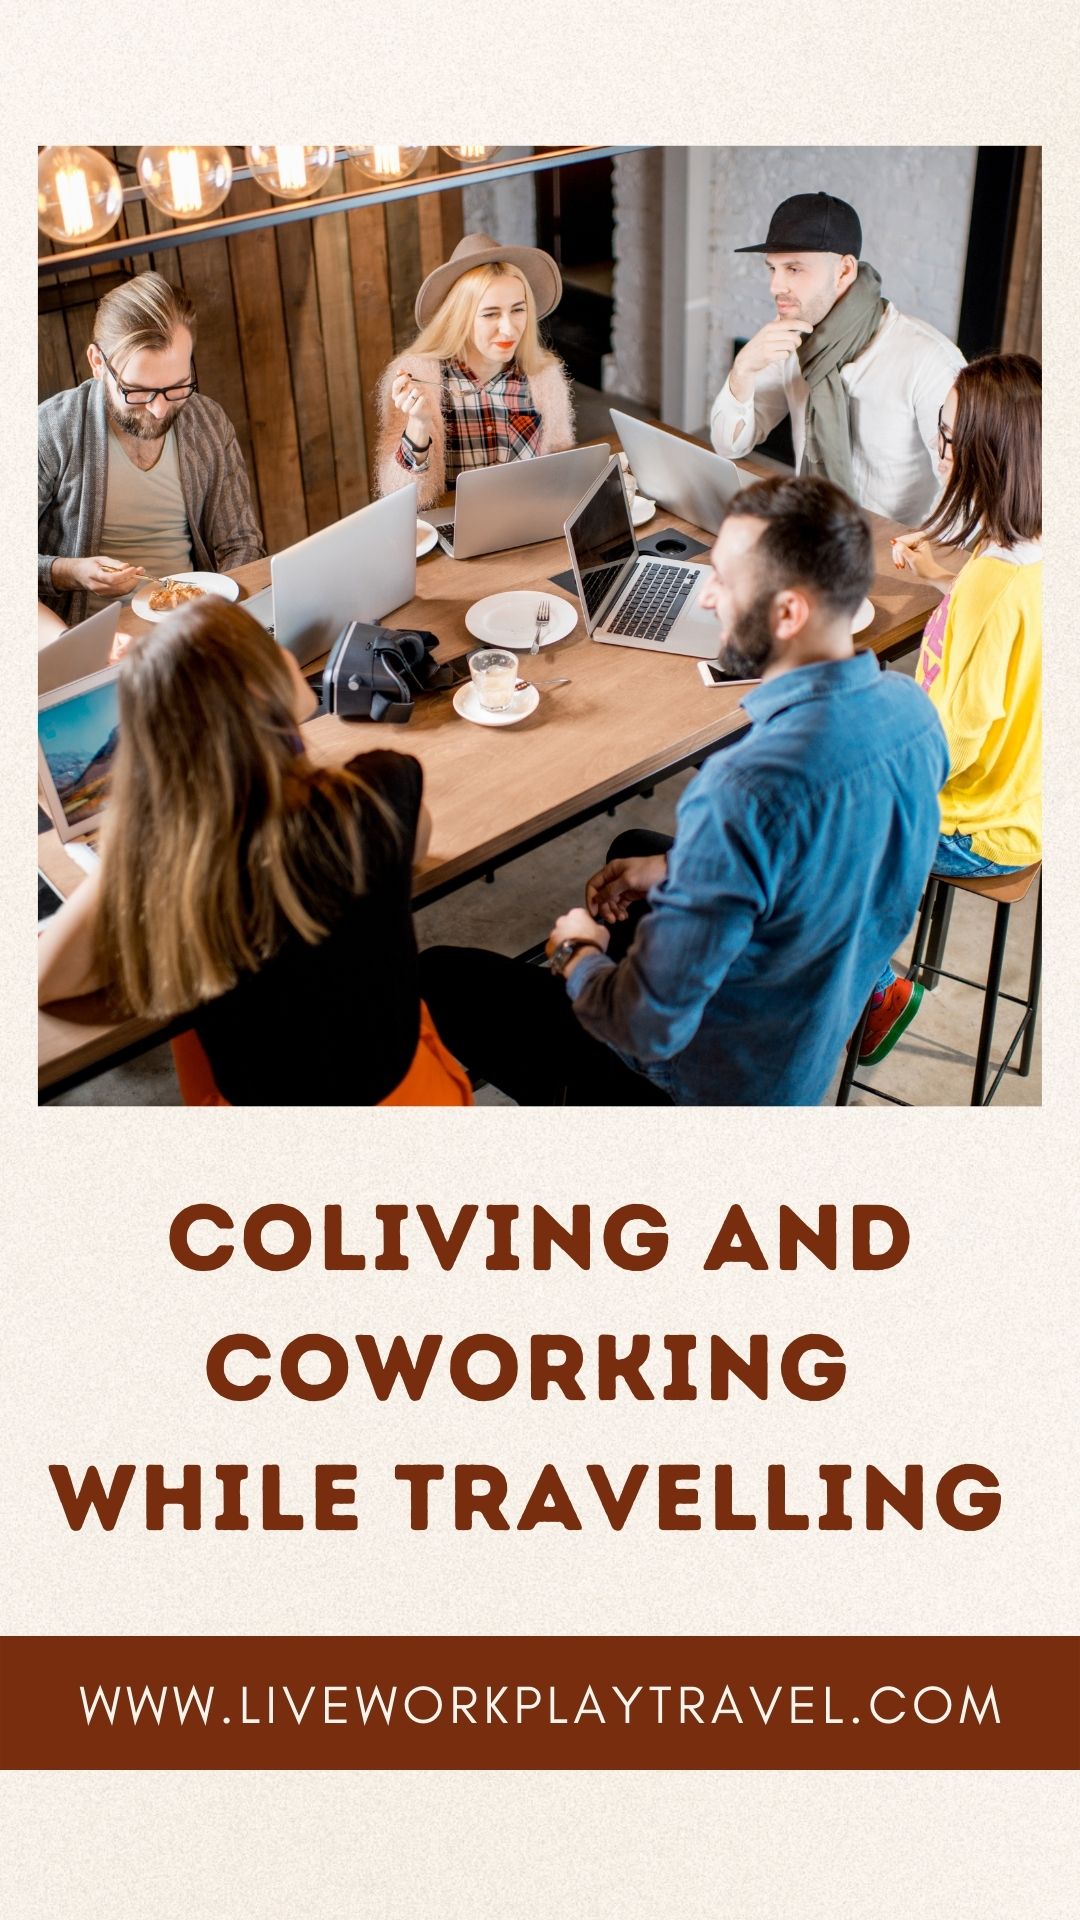 Coliving and Coworking Spaces Are Popular With Digital Nomads and Slow Travellers As They Work and Travel Abroad.